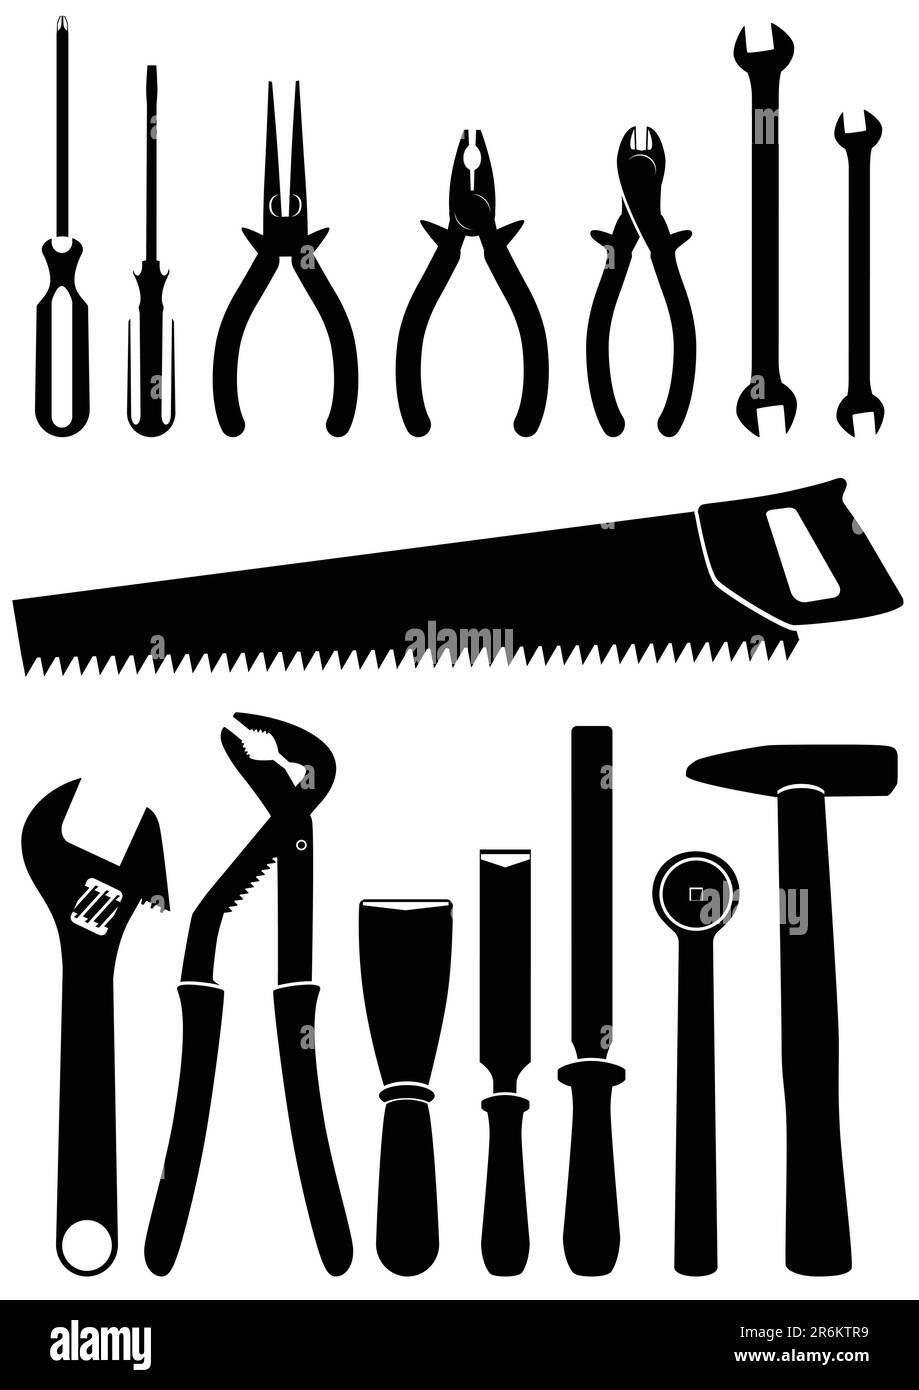 Vector illustration set of different tools. All vector objects and details are isolated and grouped. Each tool has a transparent background. Colors... Stock Vector